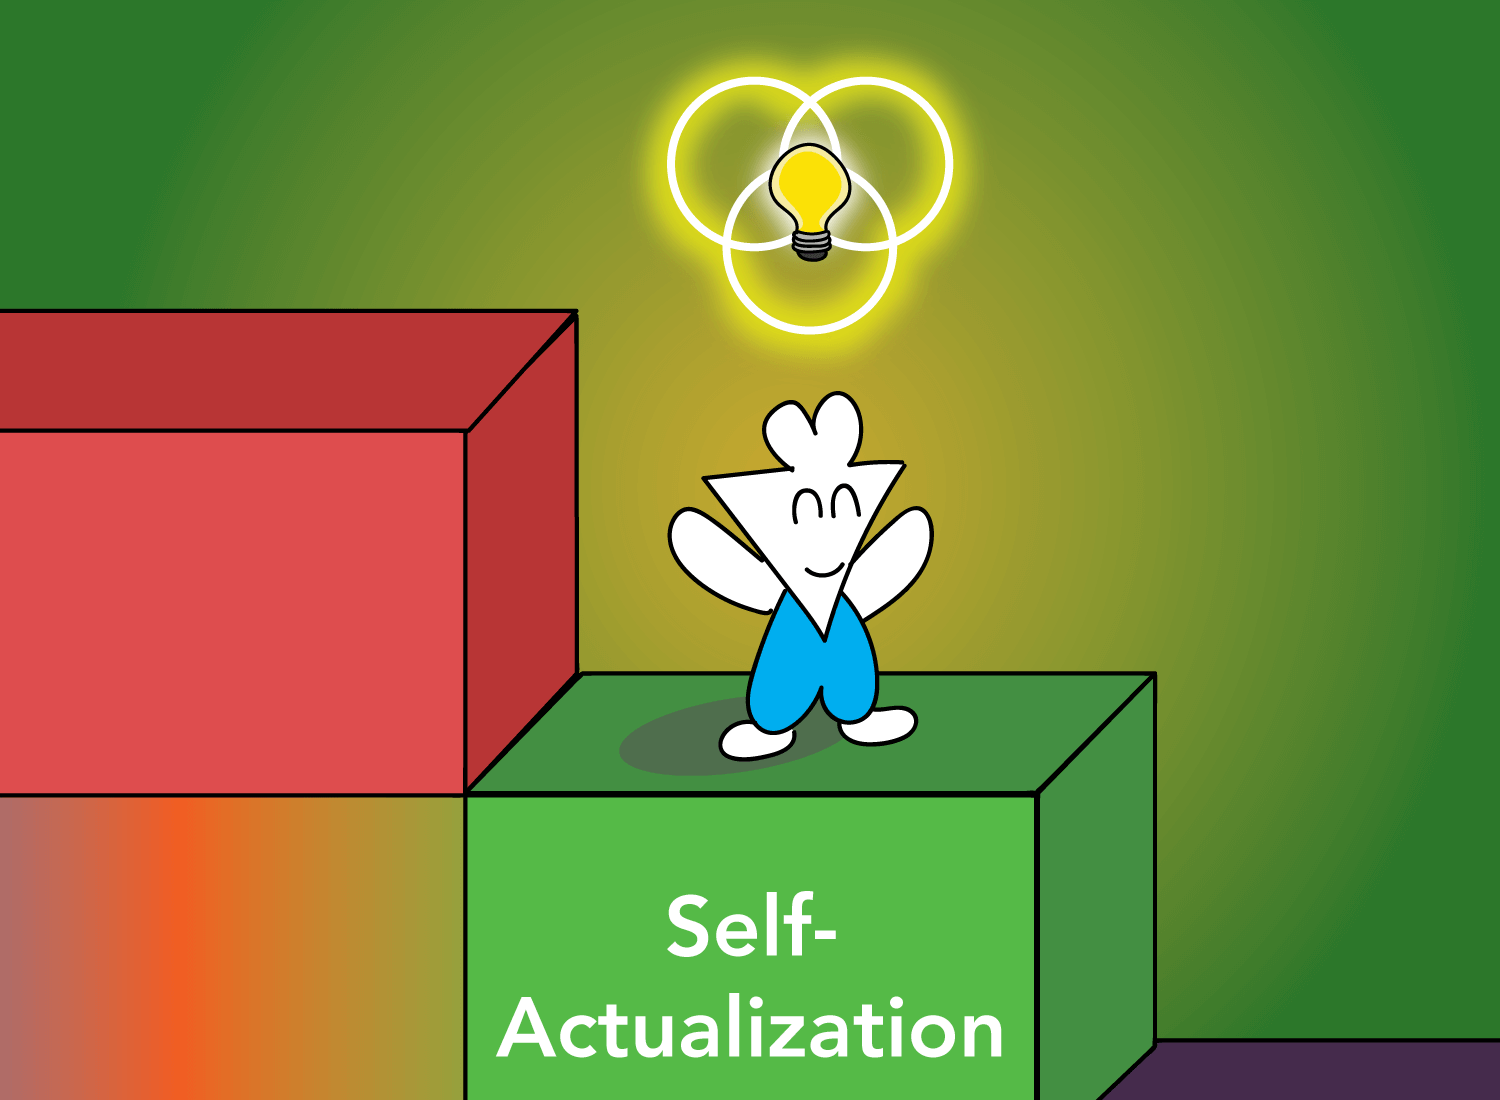 the three a's on the self-actualization step